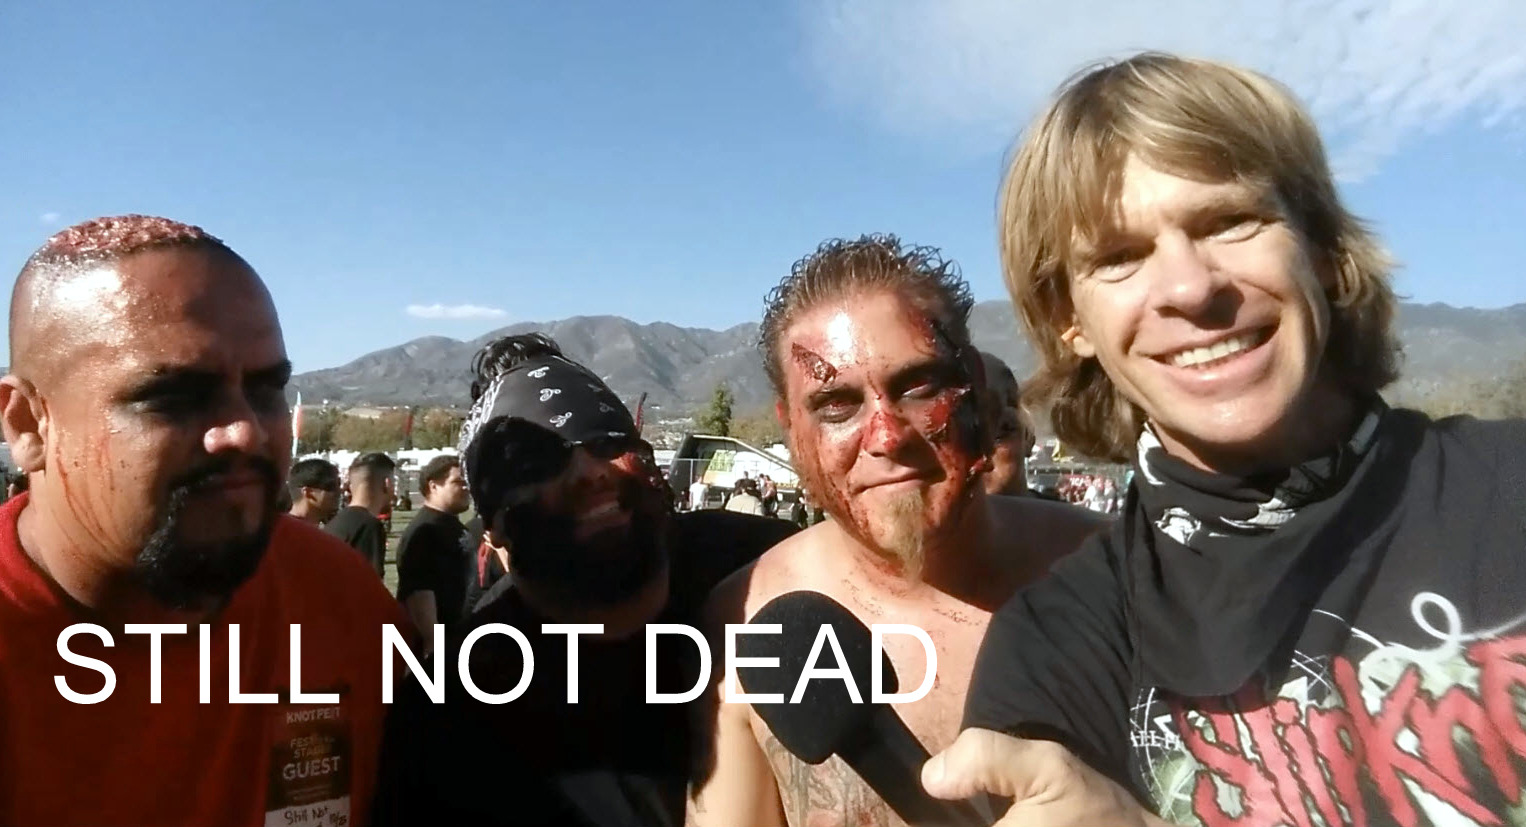 Gregory Graham aka Heavy Metal Greg interviewing the band Still Not Dead at the 2015 Knotfest.